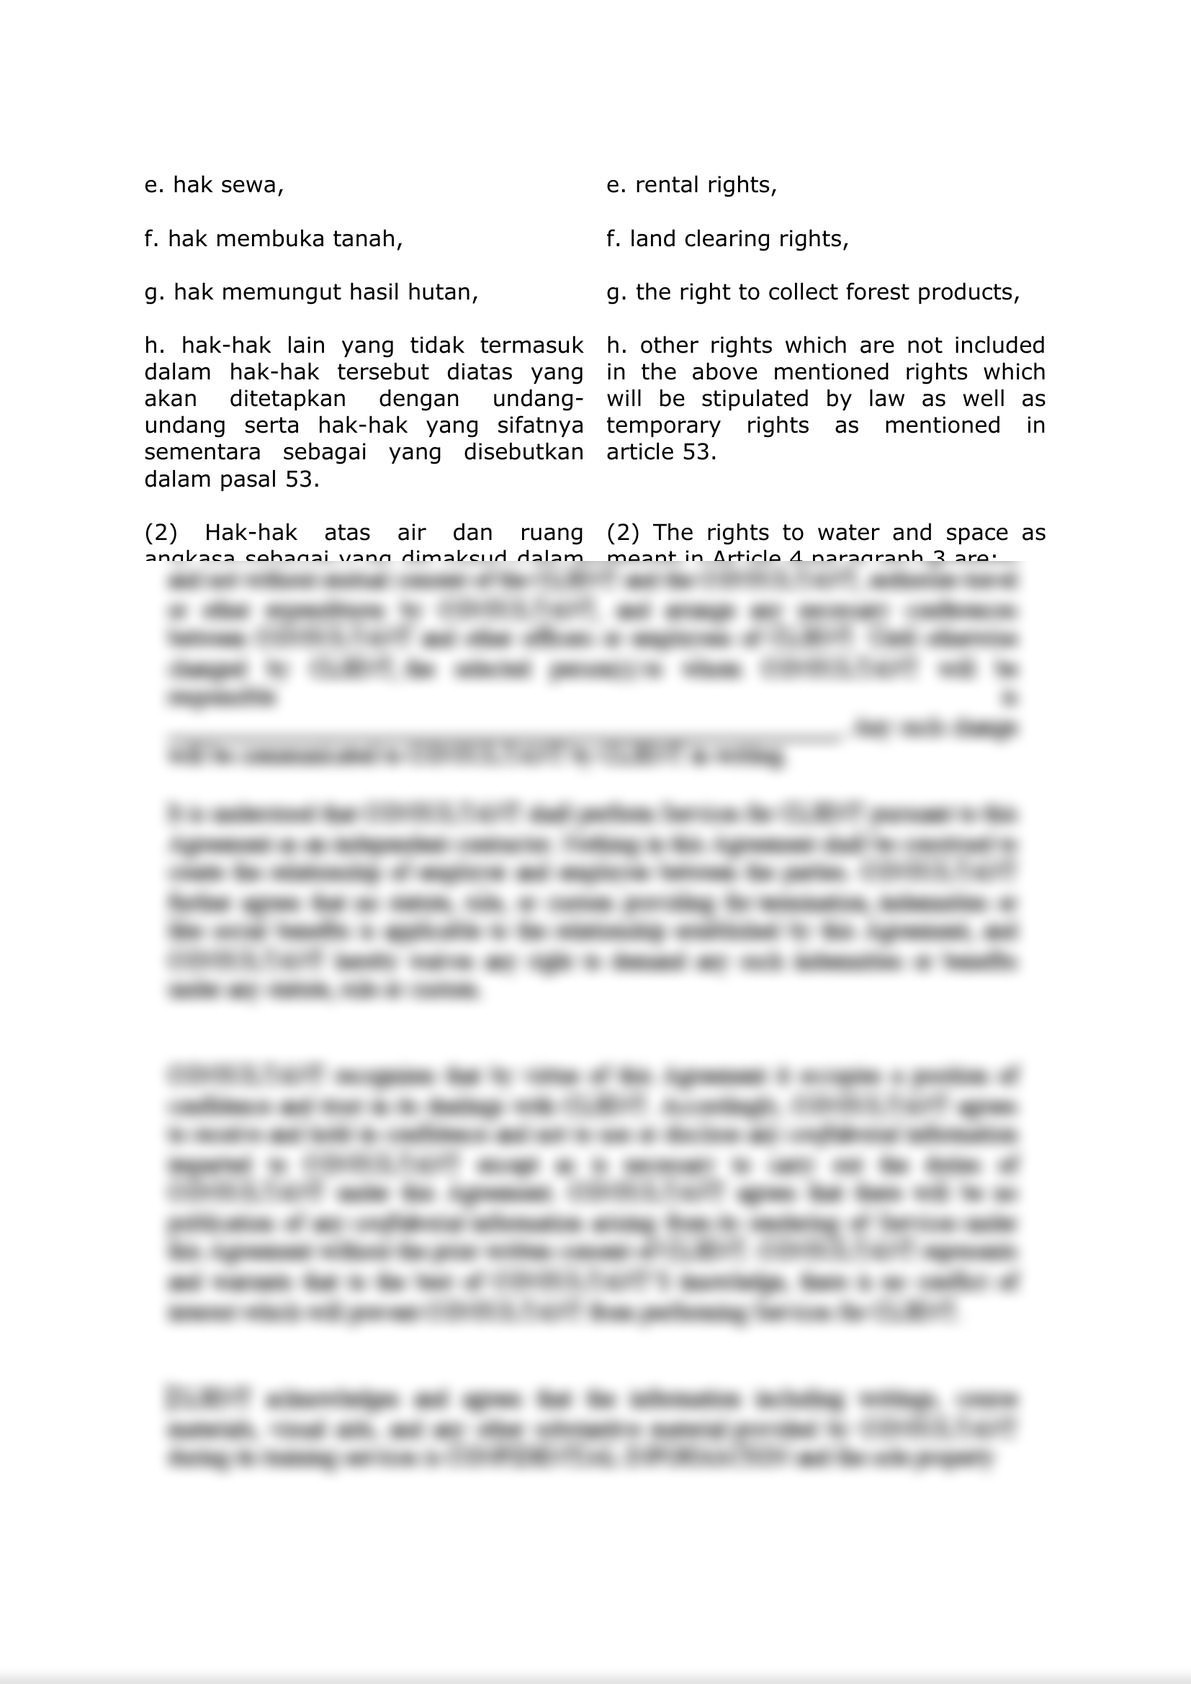 Law of the Republic of Indonesia Number: 5 of 1960 Concerning Basic Regulations on Agrarian Principles-7